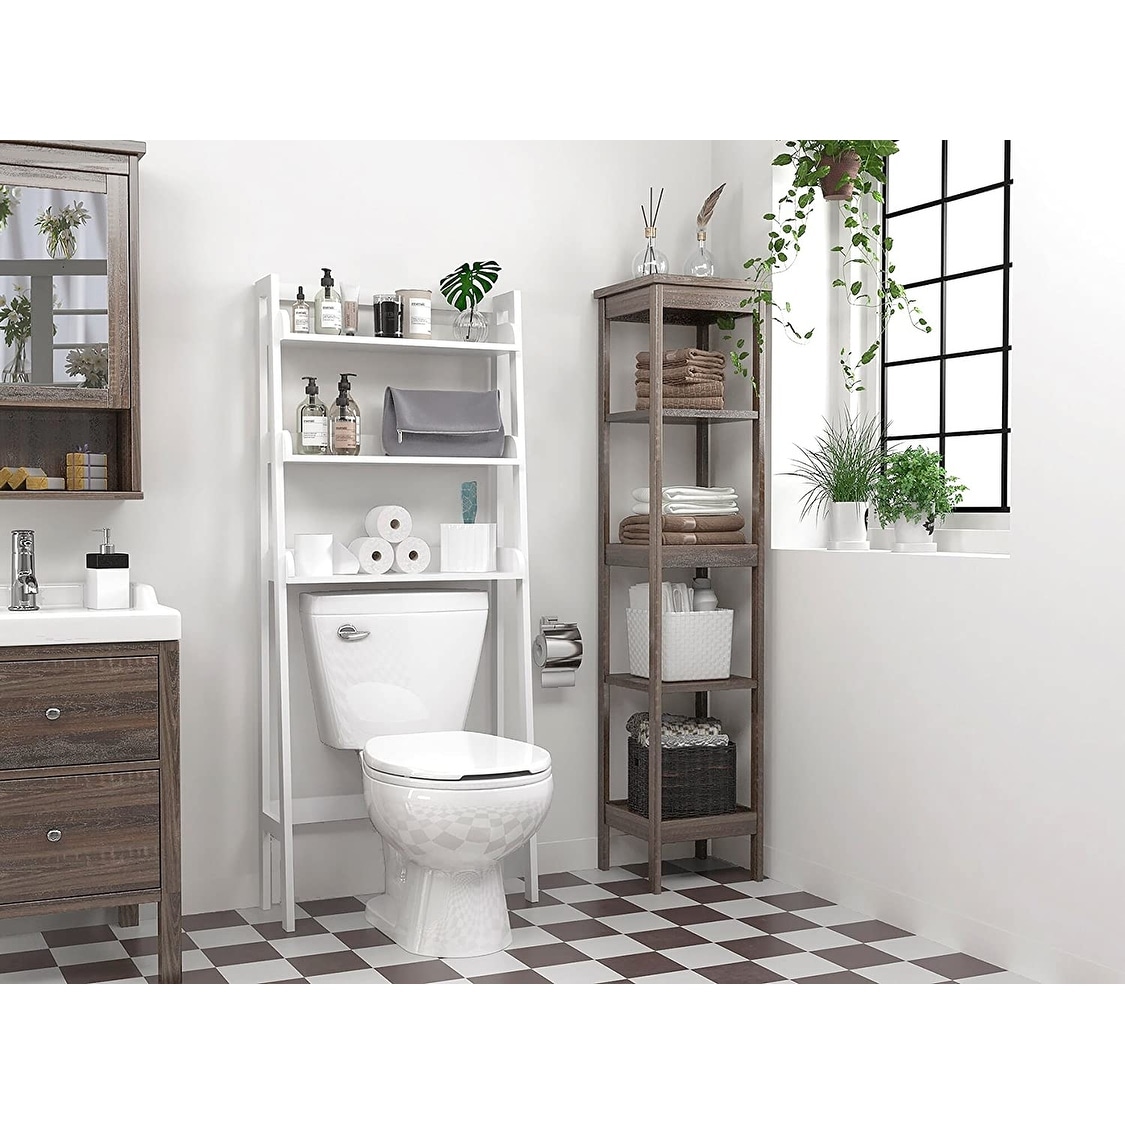 https://ak1.ostkcdn.com/images/products/is/images/direct/b35e078bbe1daf97c5eeef417cc9d6d7c8ad86f0/UTEX-3-Shelf-Bathroom-Organizer-Over-The-Toilet-%28Espresso%29.jpg